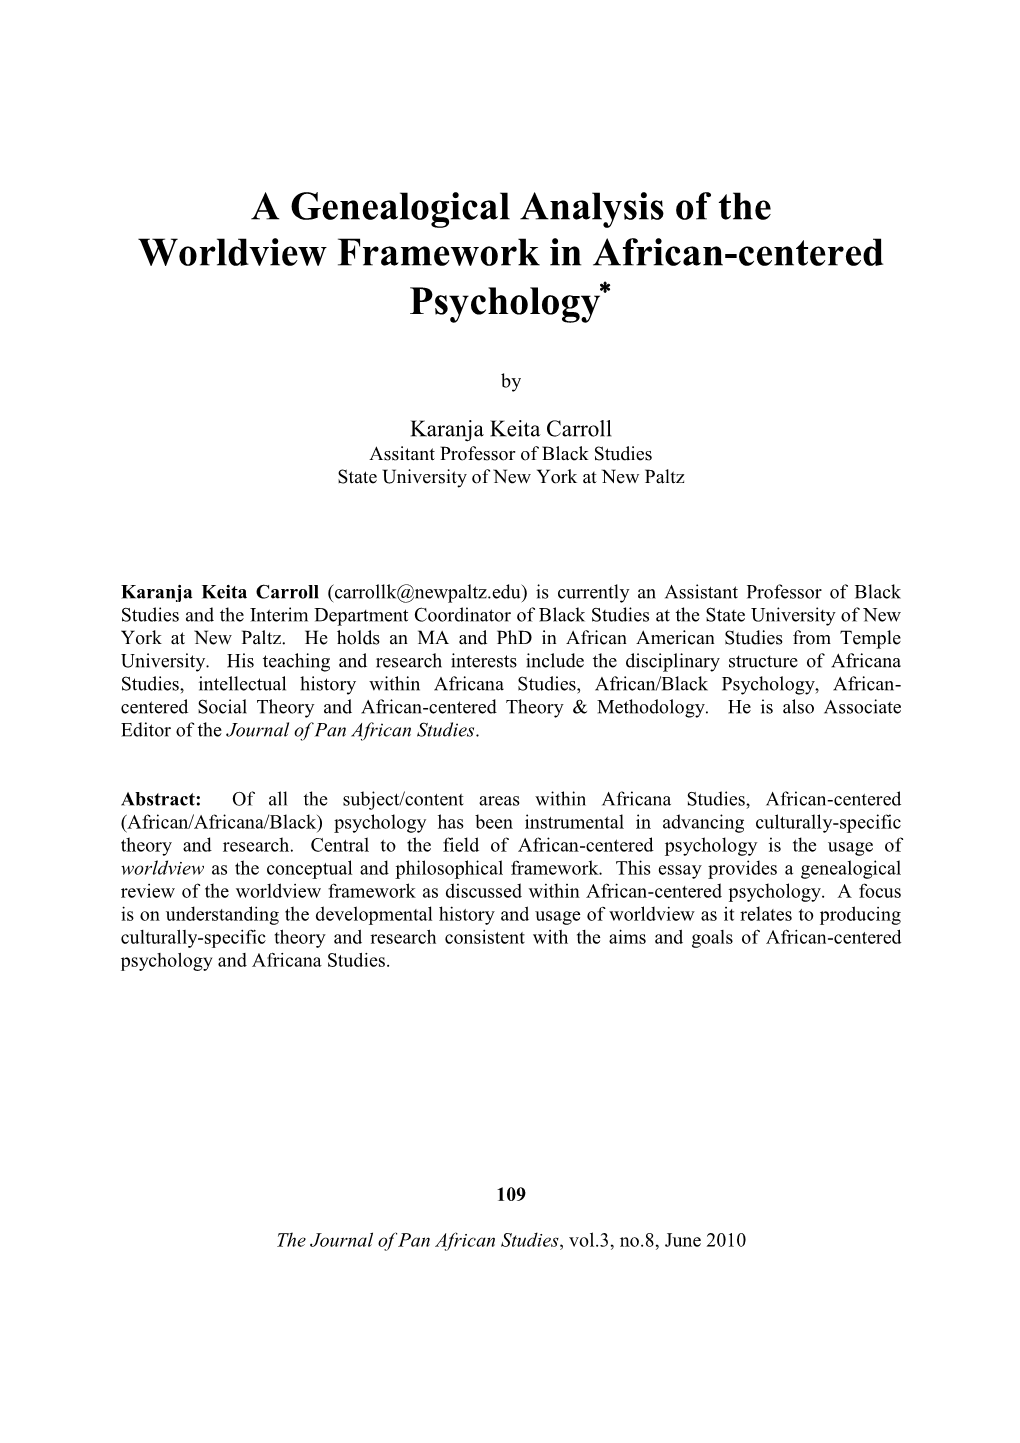 A Genealogical Analysis of the Worldview Framework in African-Centered Psychology